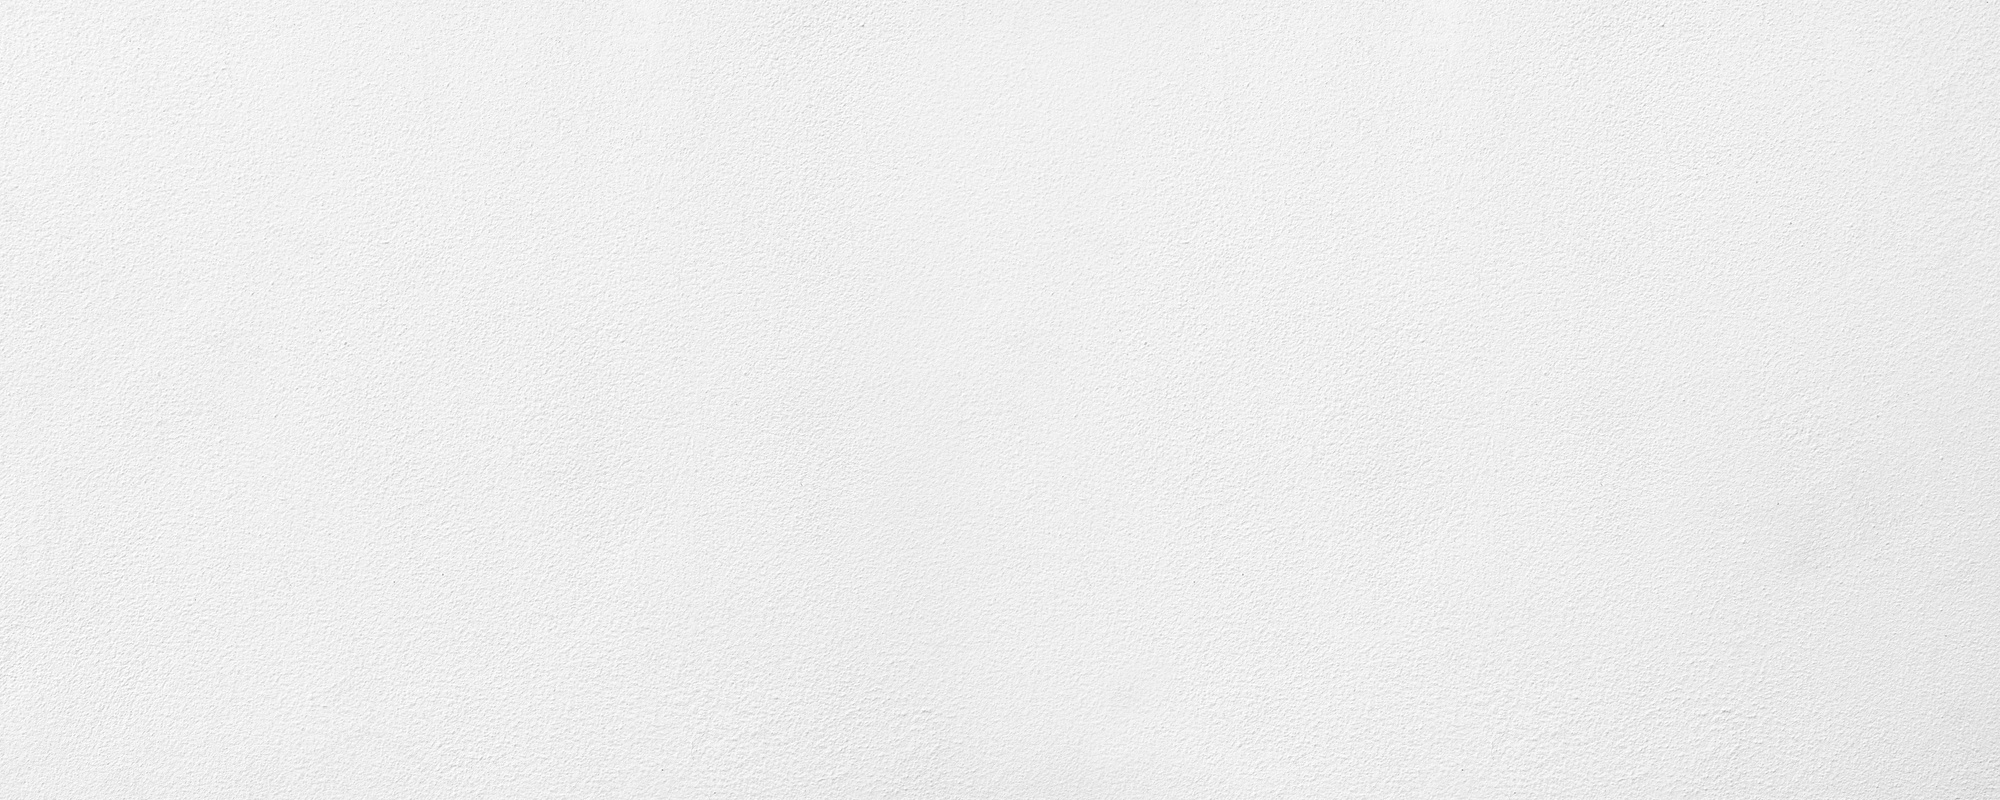 Abstract White Cement Wall Background 